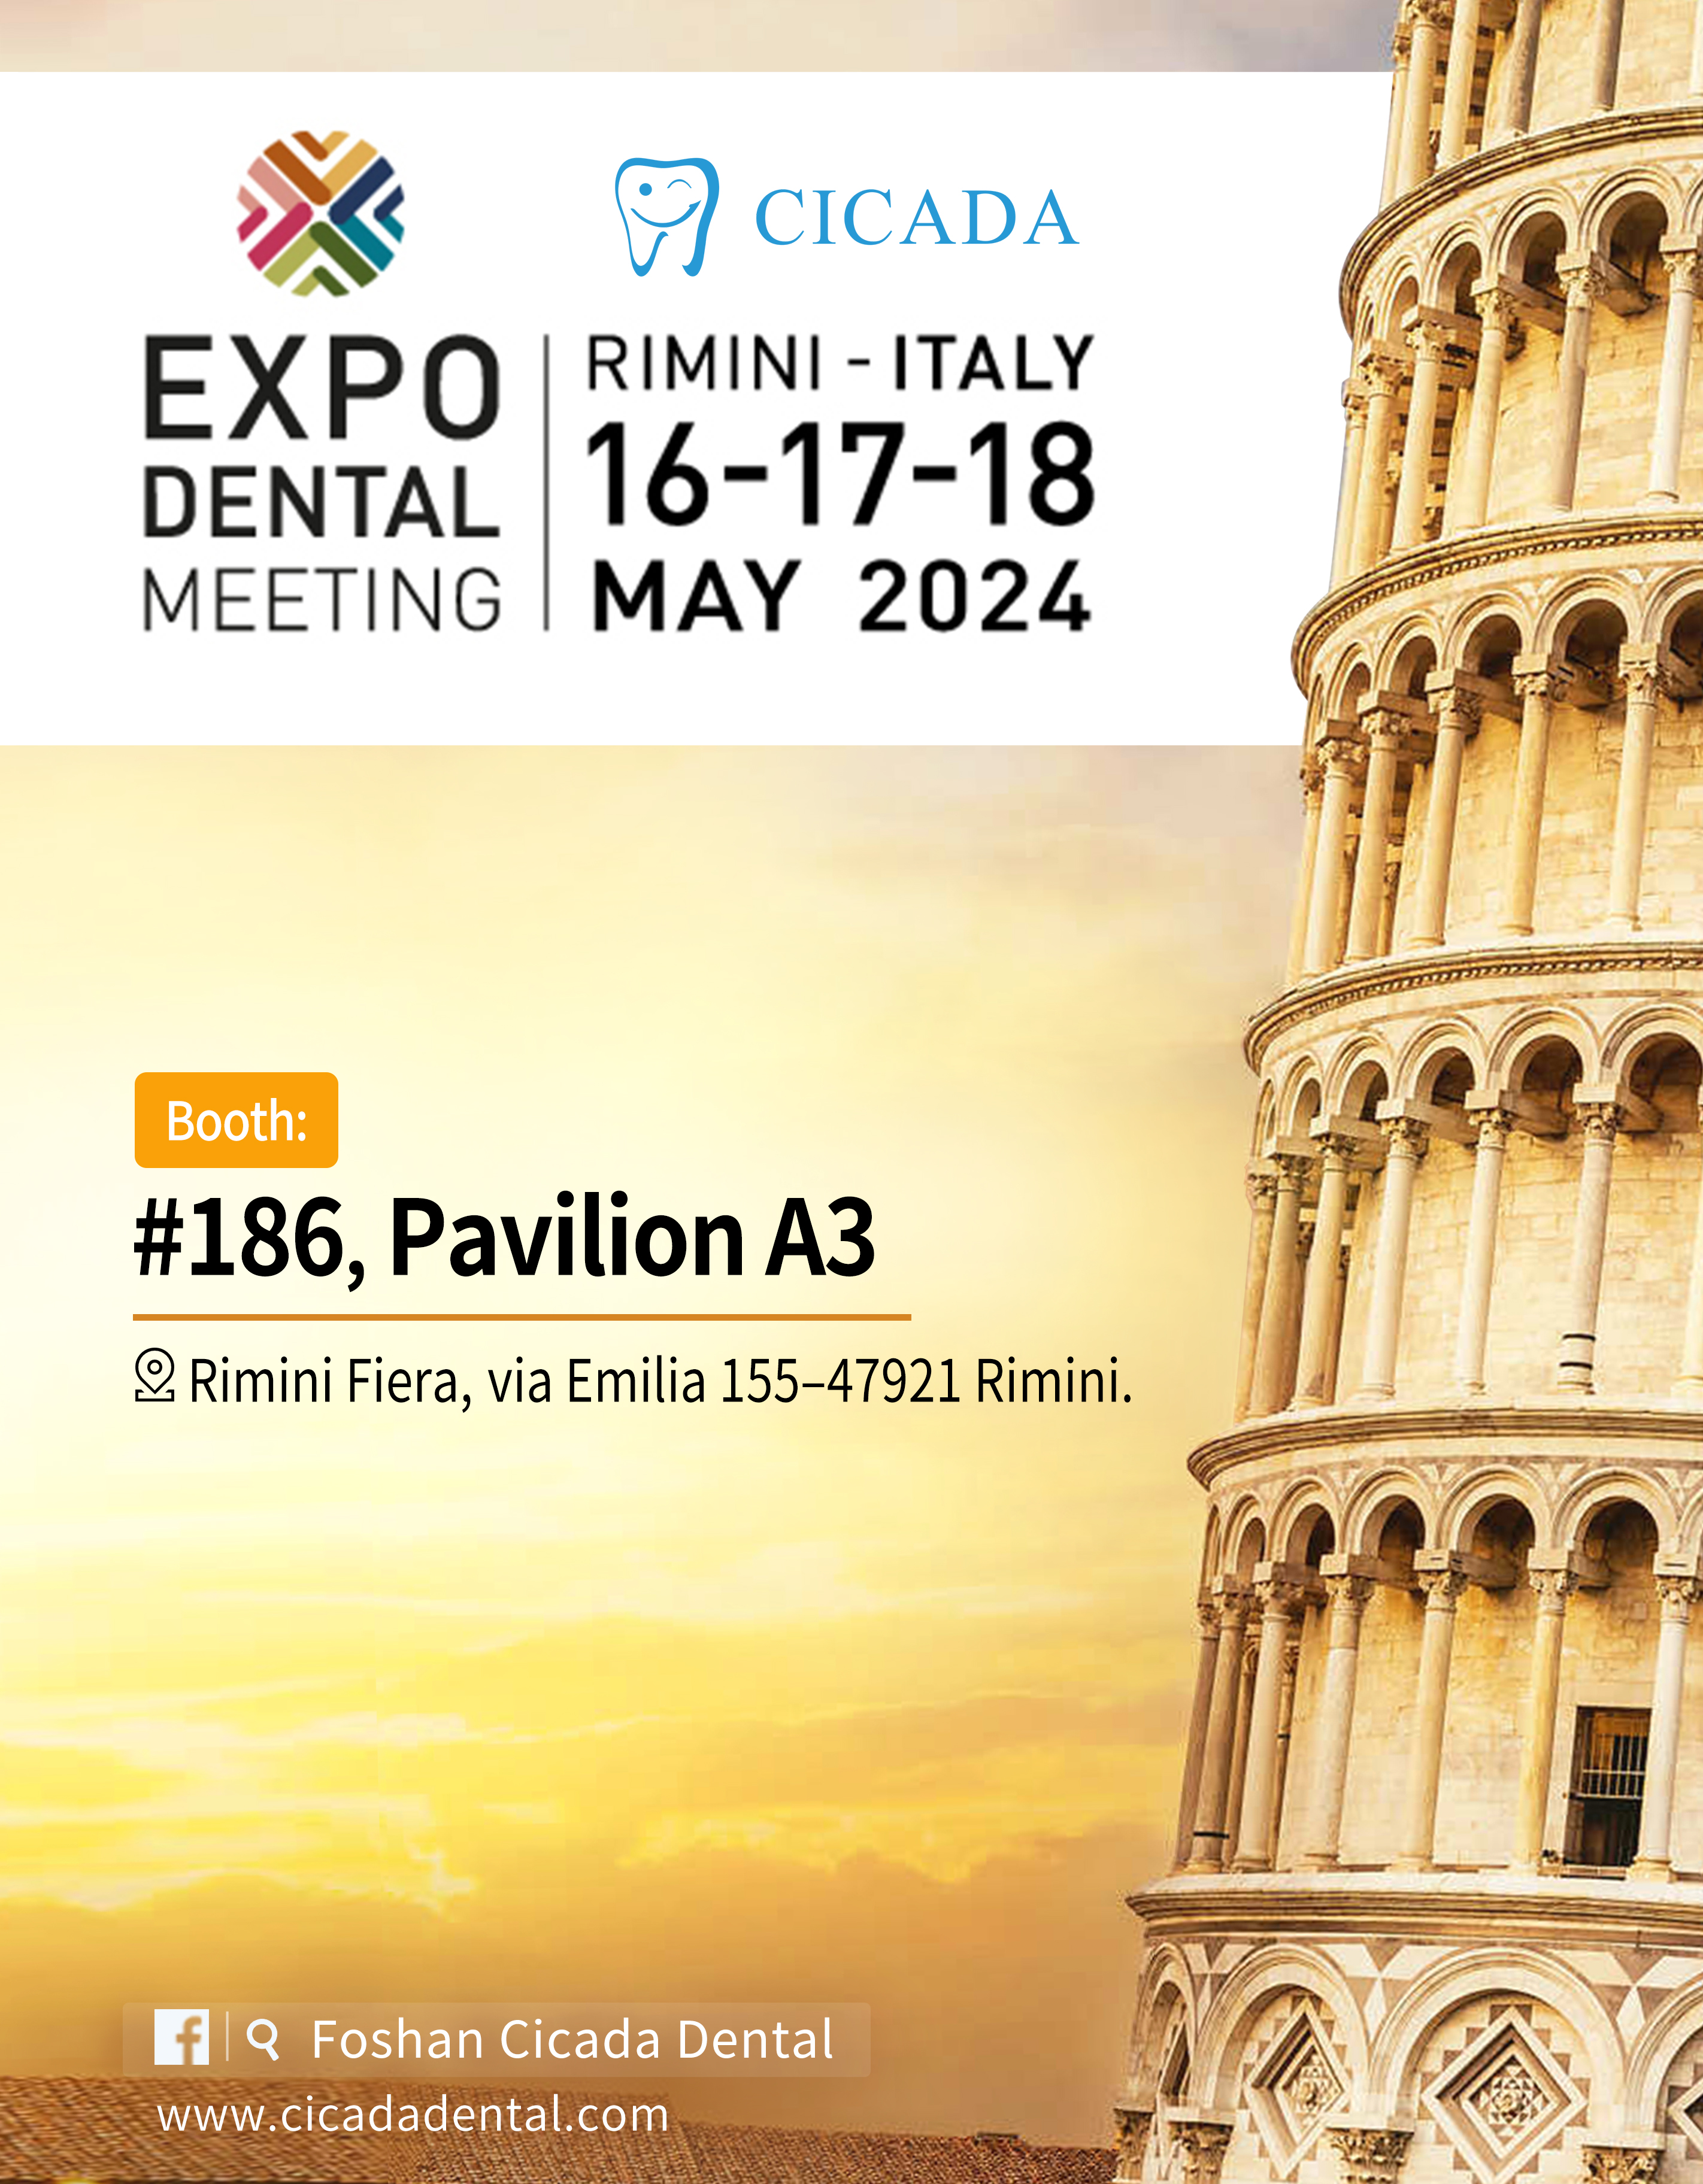 Meet CICADA in Rimini for Expodental Meeting 2024